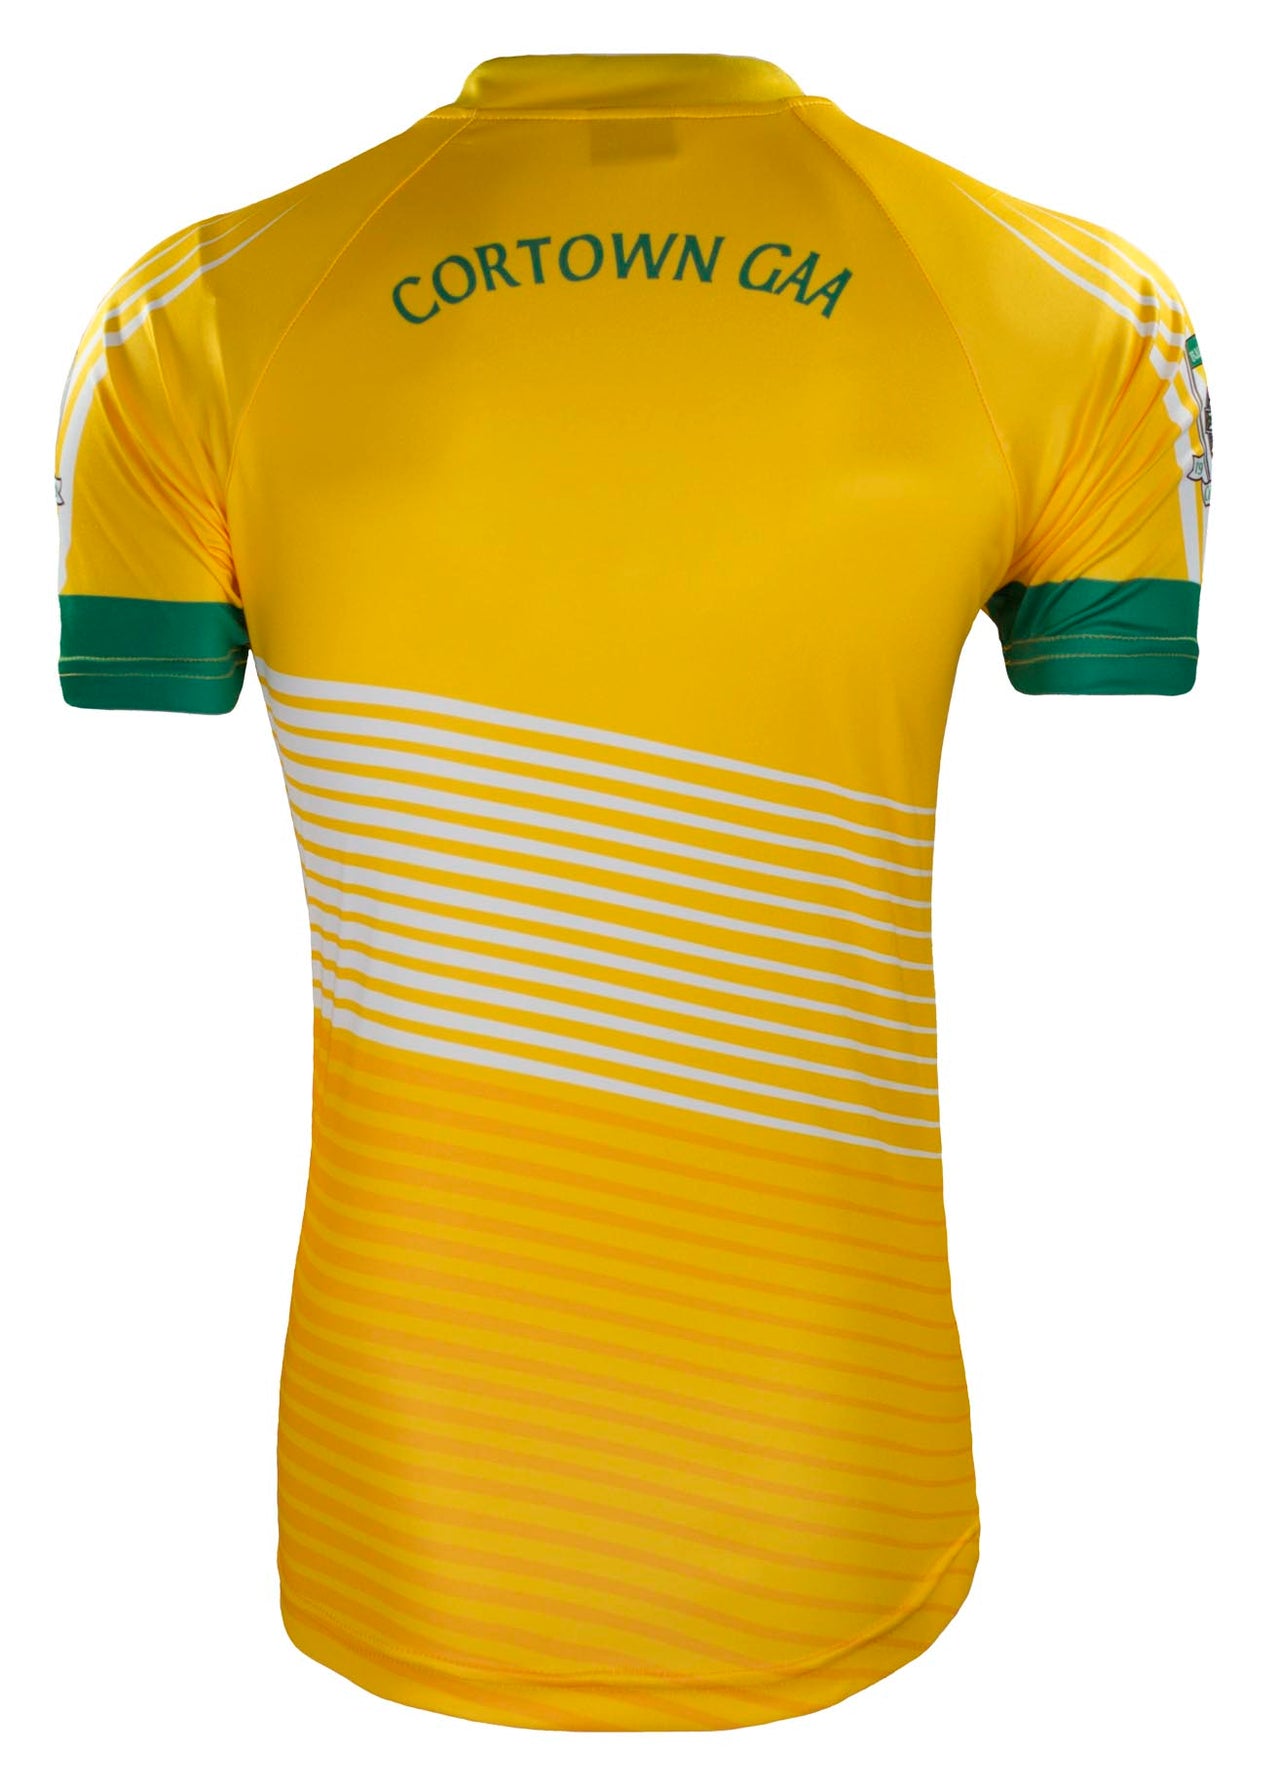 Cortown GFC Home Jersey Player Fit Adult